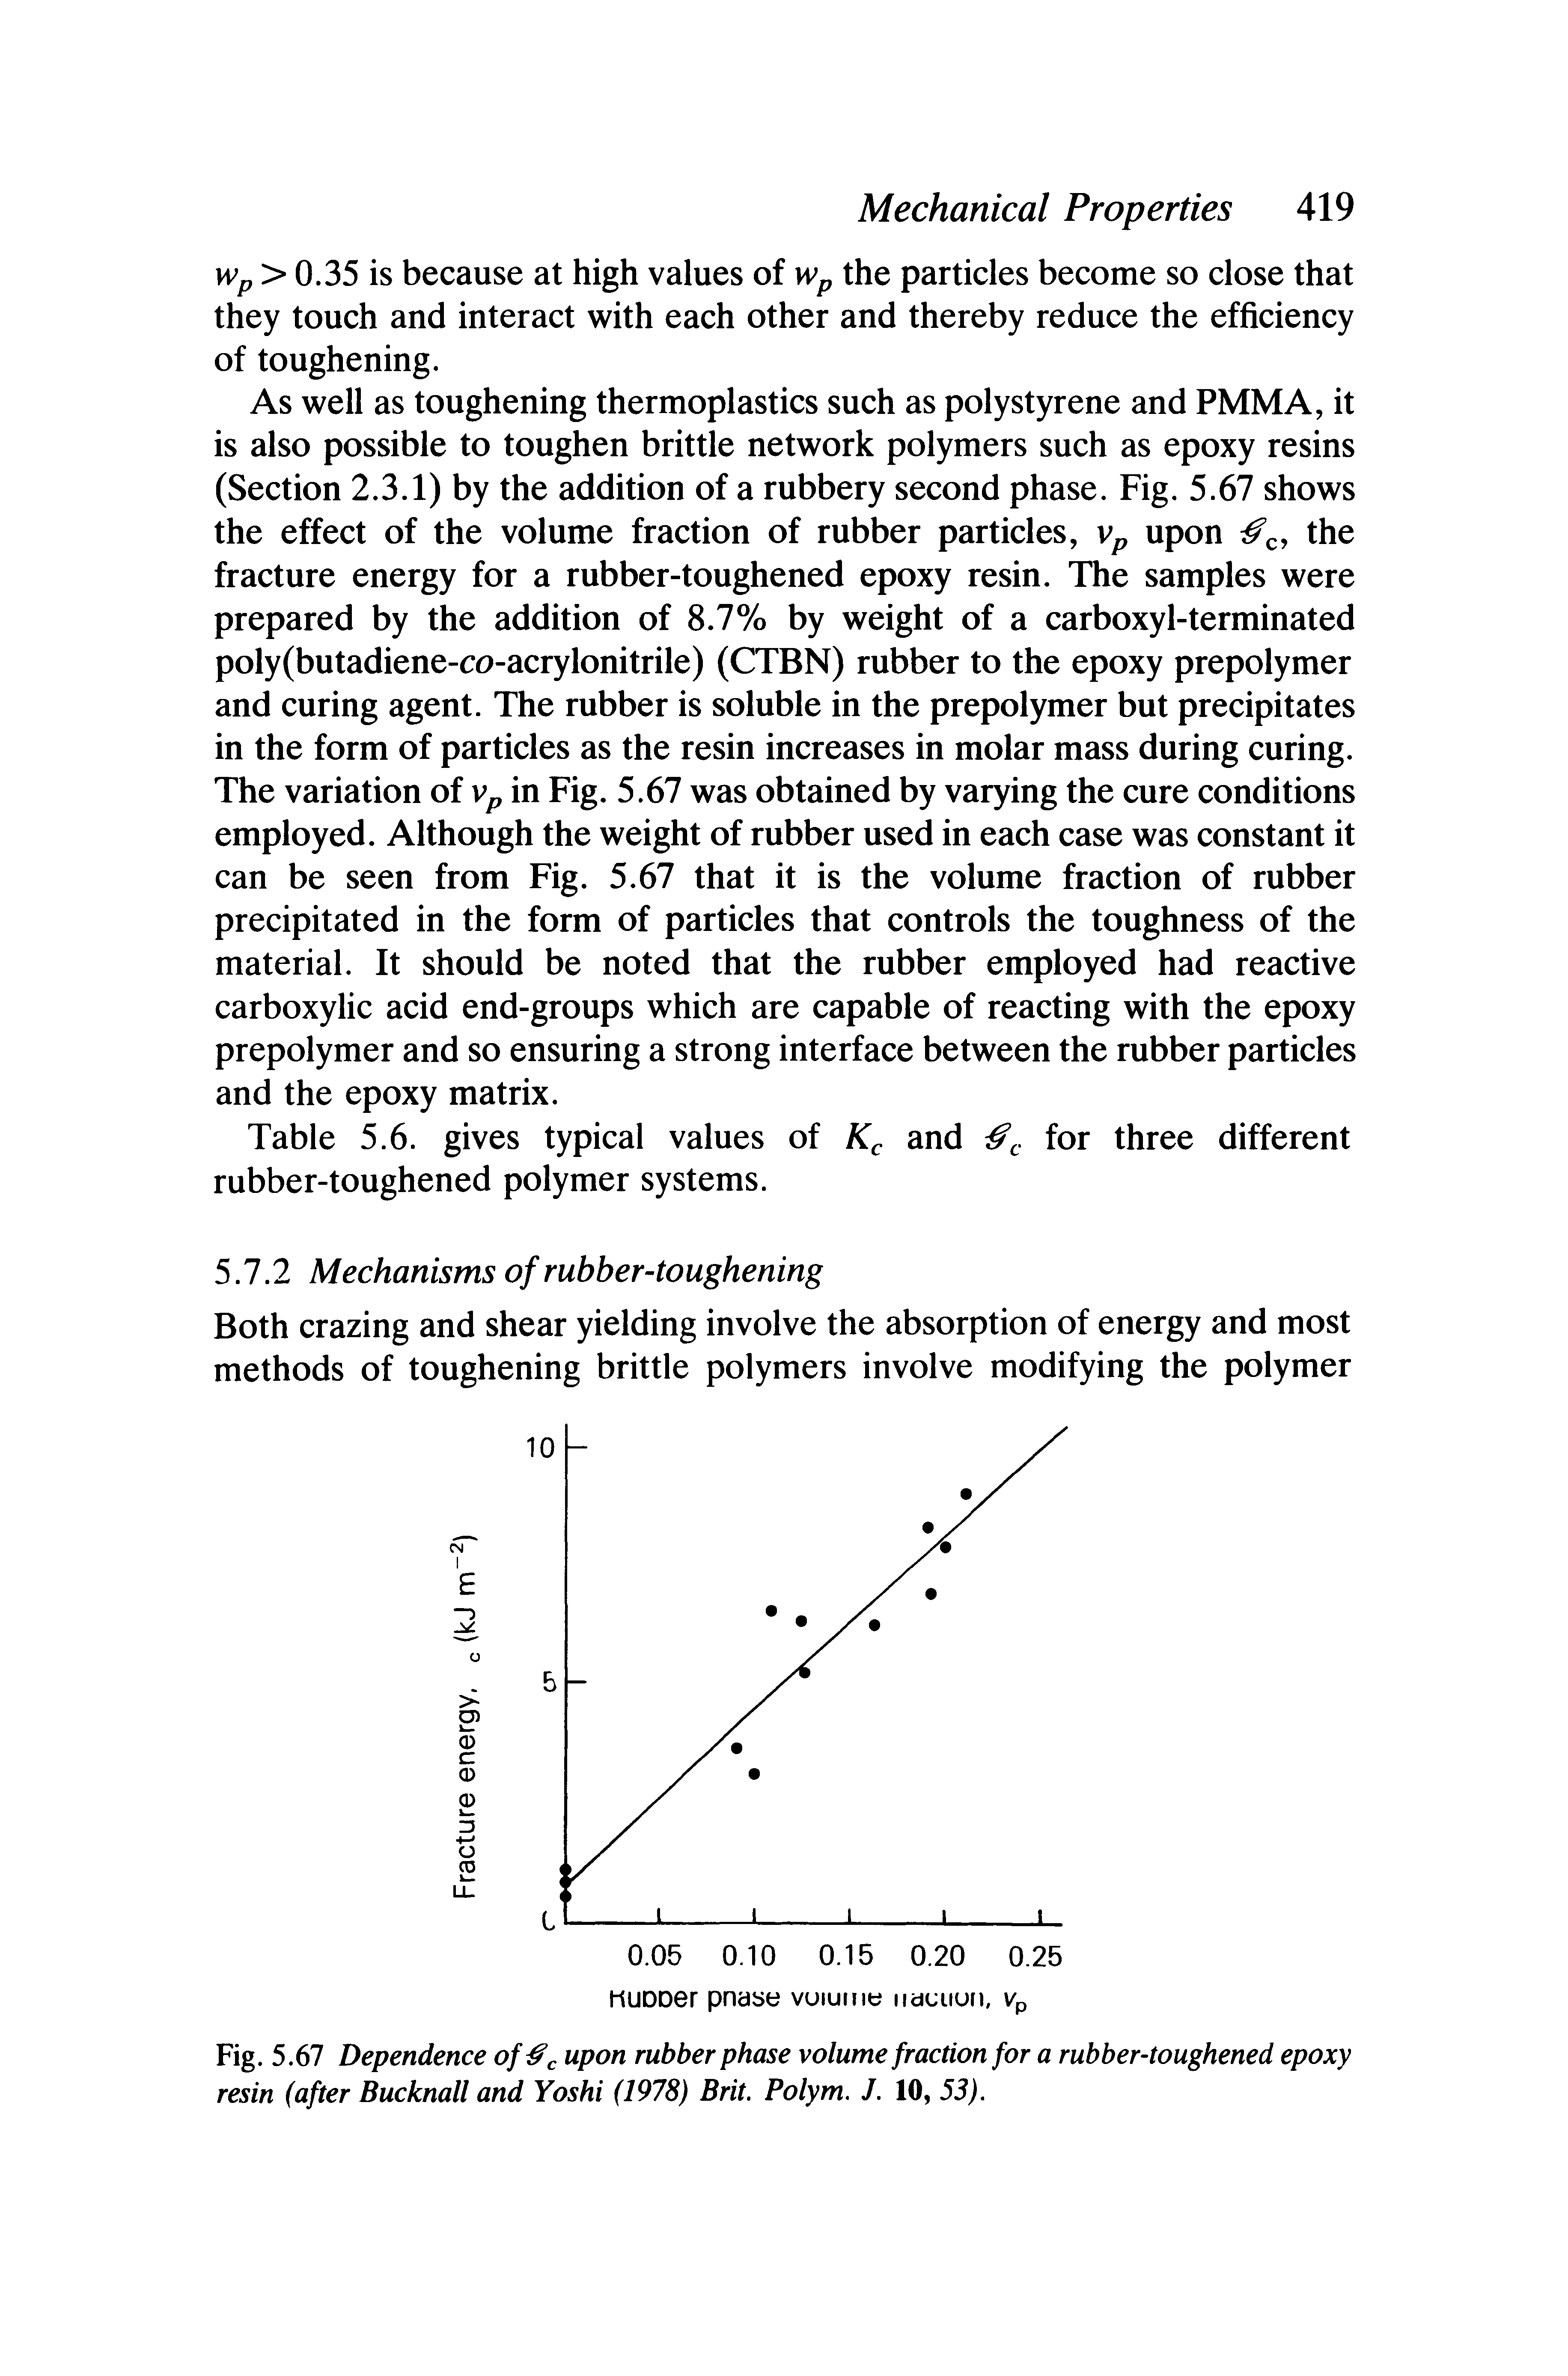 Fig. 5.67 Dependence of upon rubber phase volume fraction for a rubber-toughened epoxy resin (after Bucknall and Yoshi (1978) Brit. Polym. J. 10, 53).